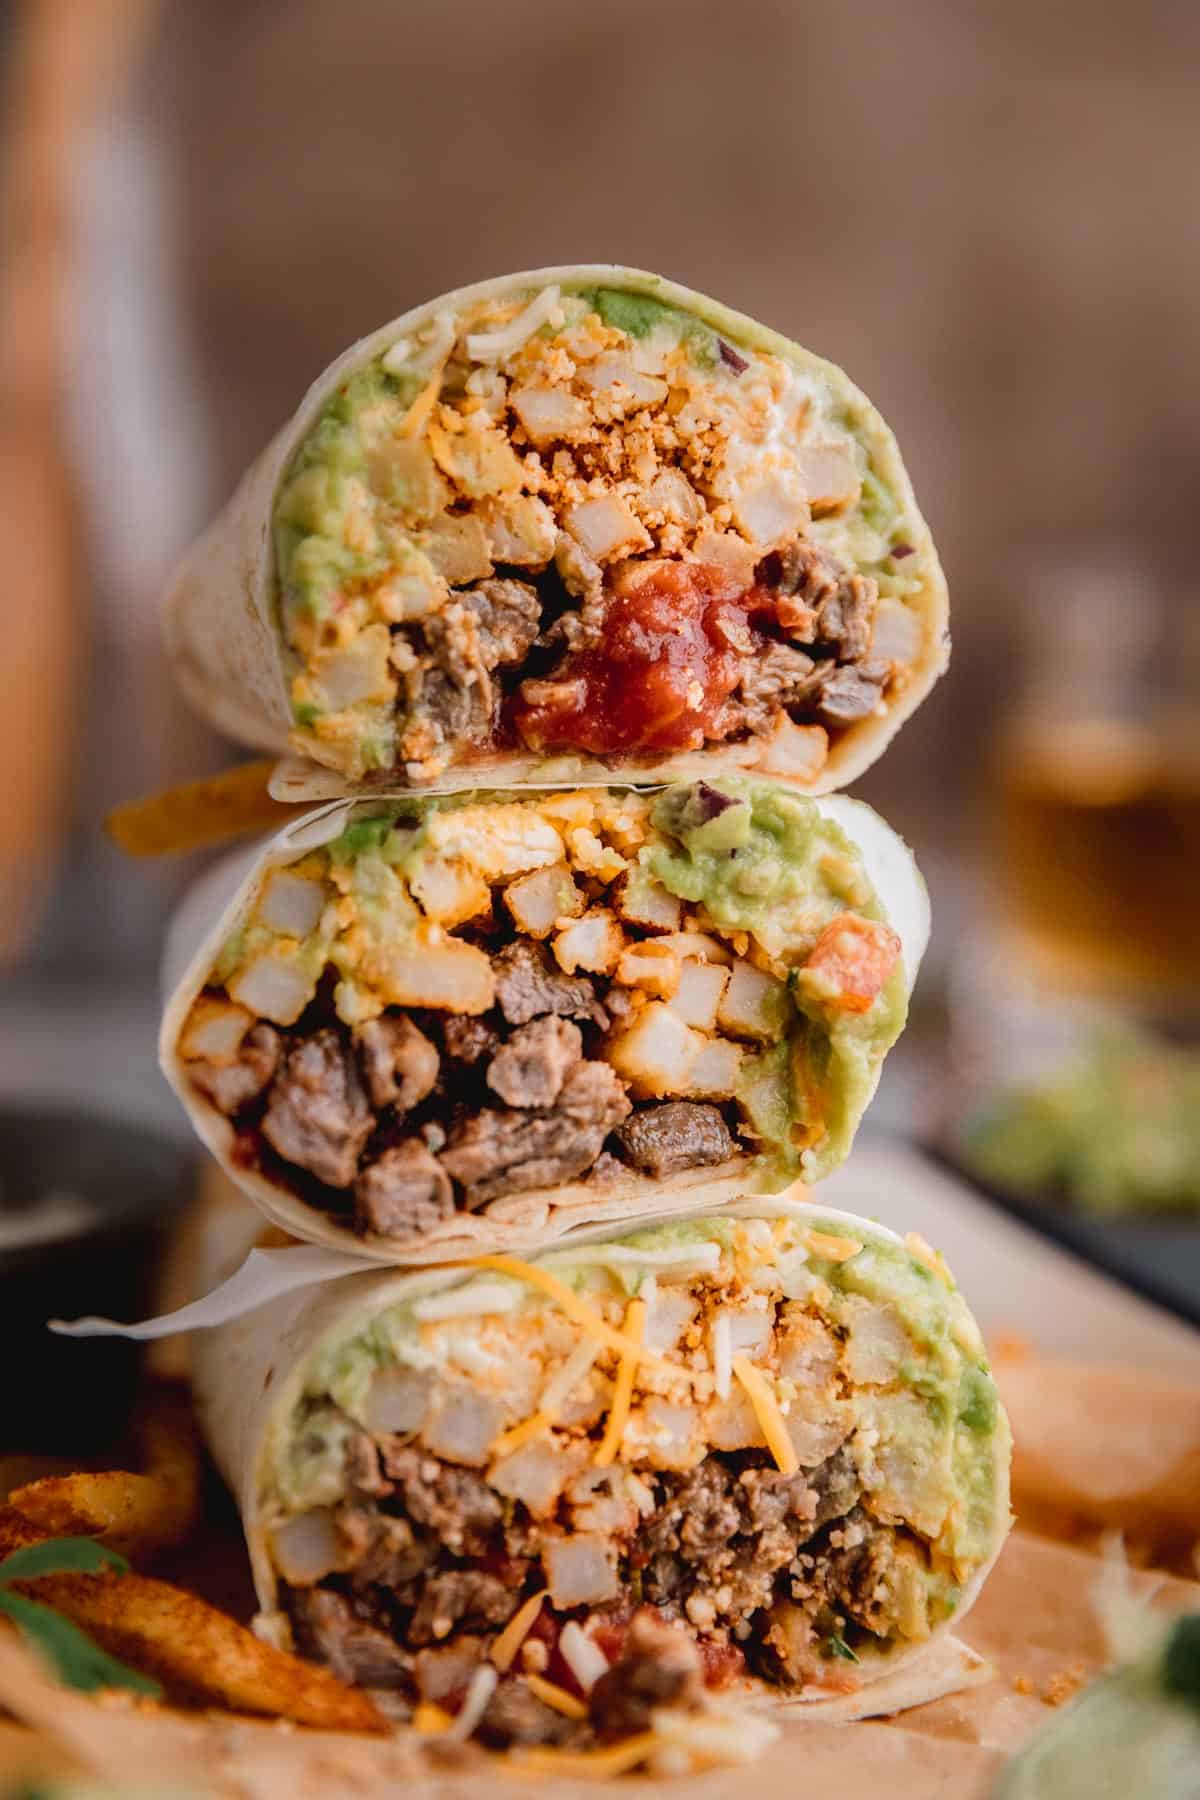 California Burrito stacked on top of each other, stuffed with french fries, steak, cheese and guacamole. 